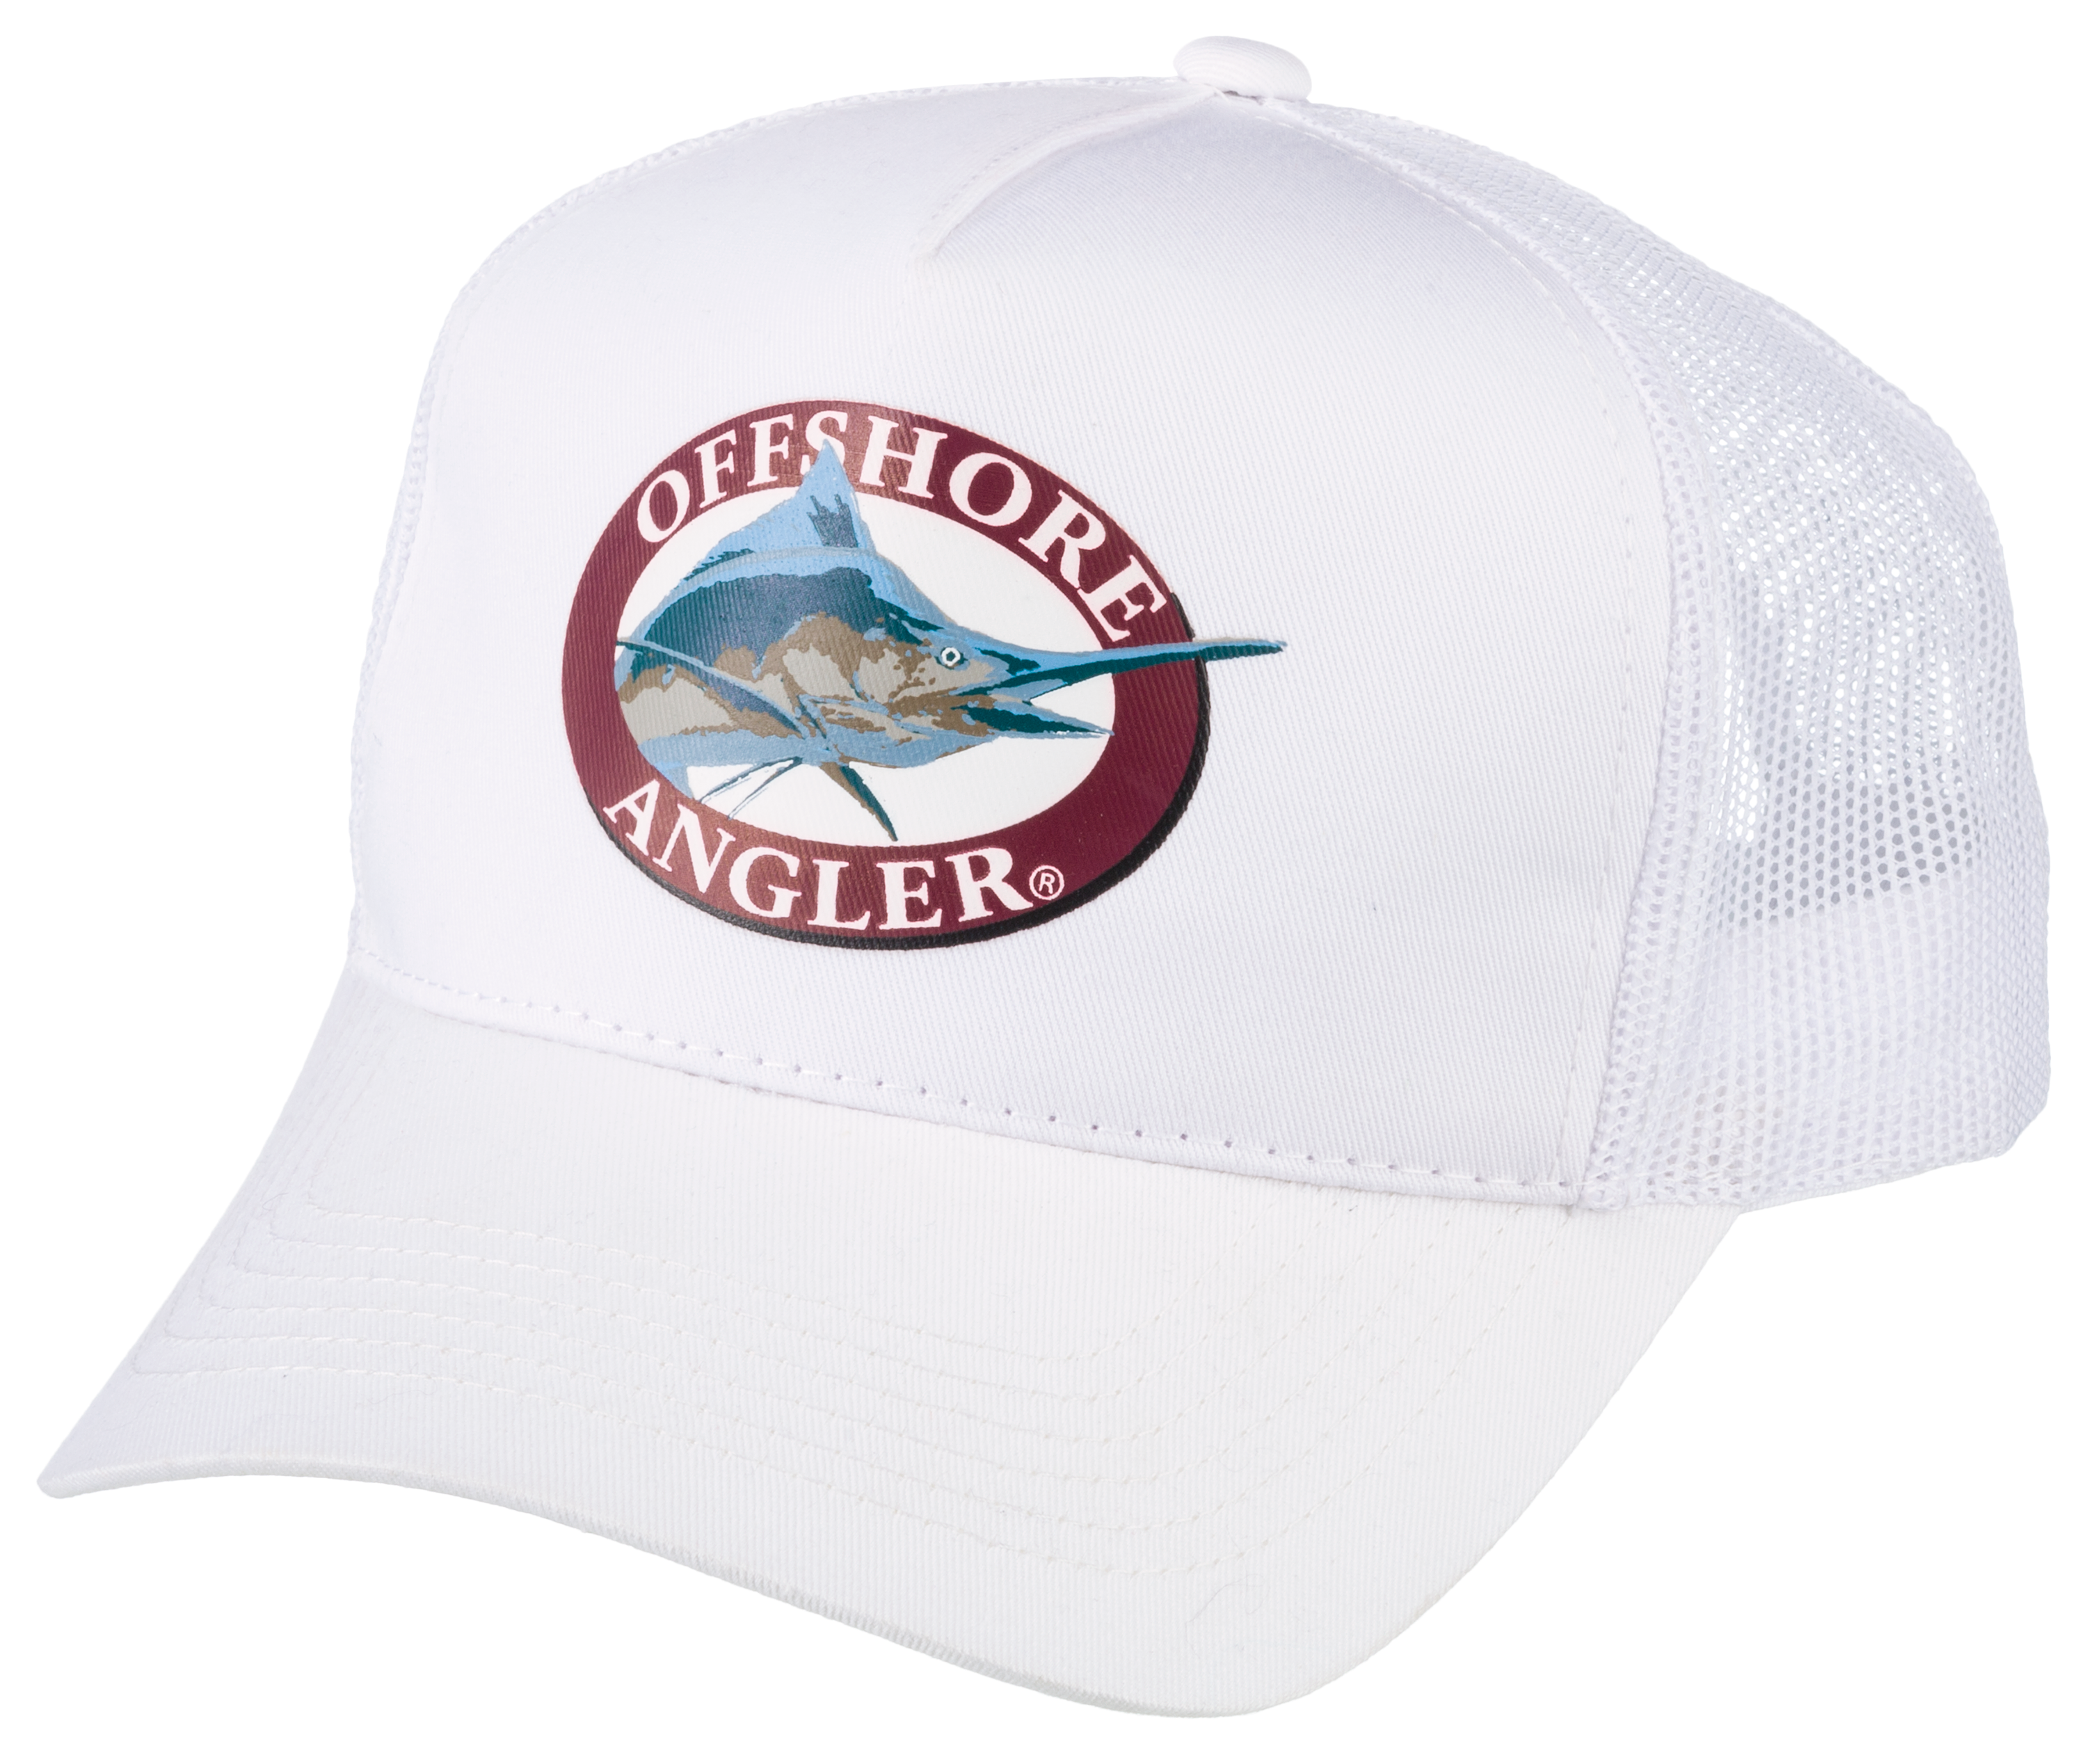 Offshore Angler Business Gifts